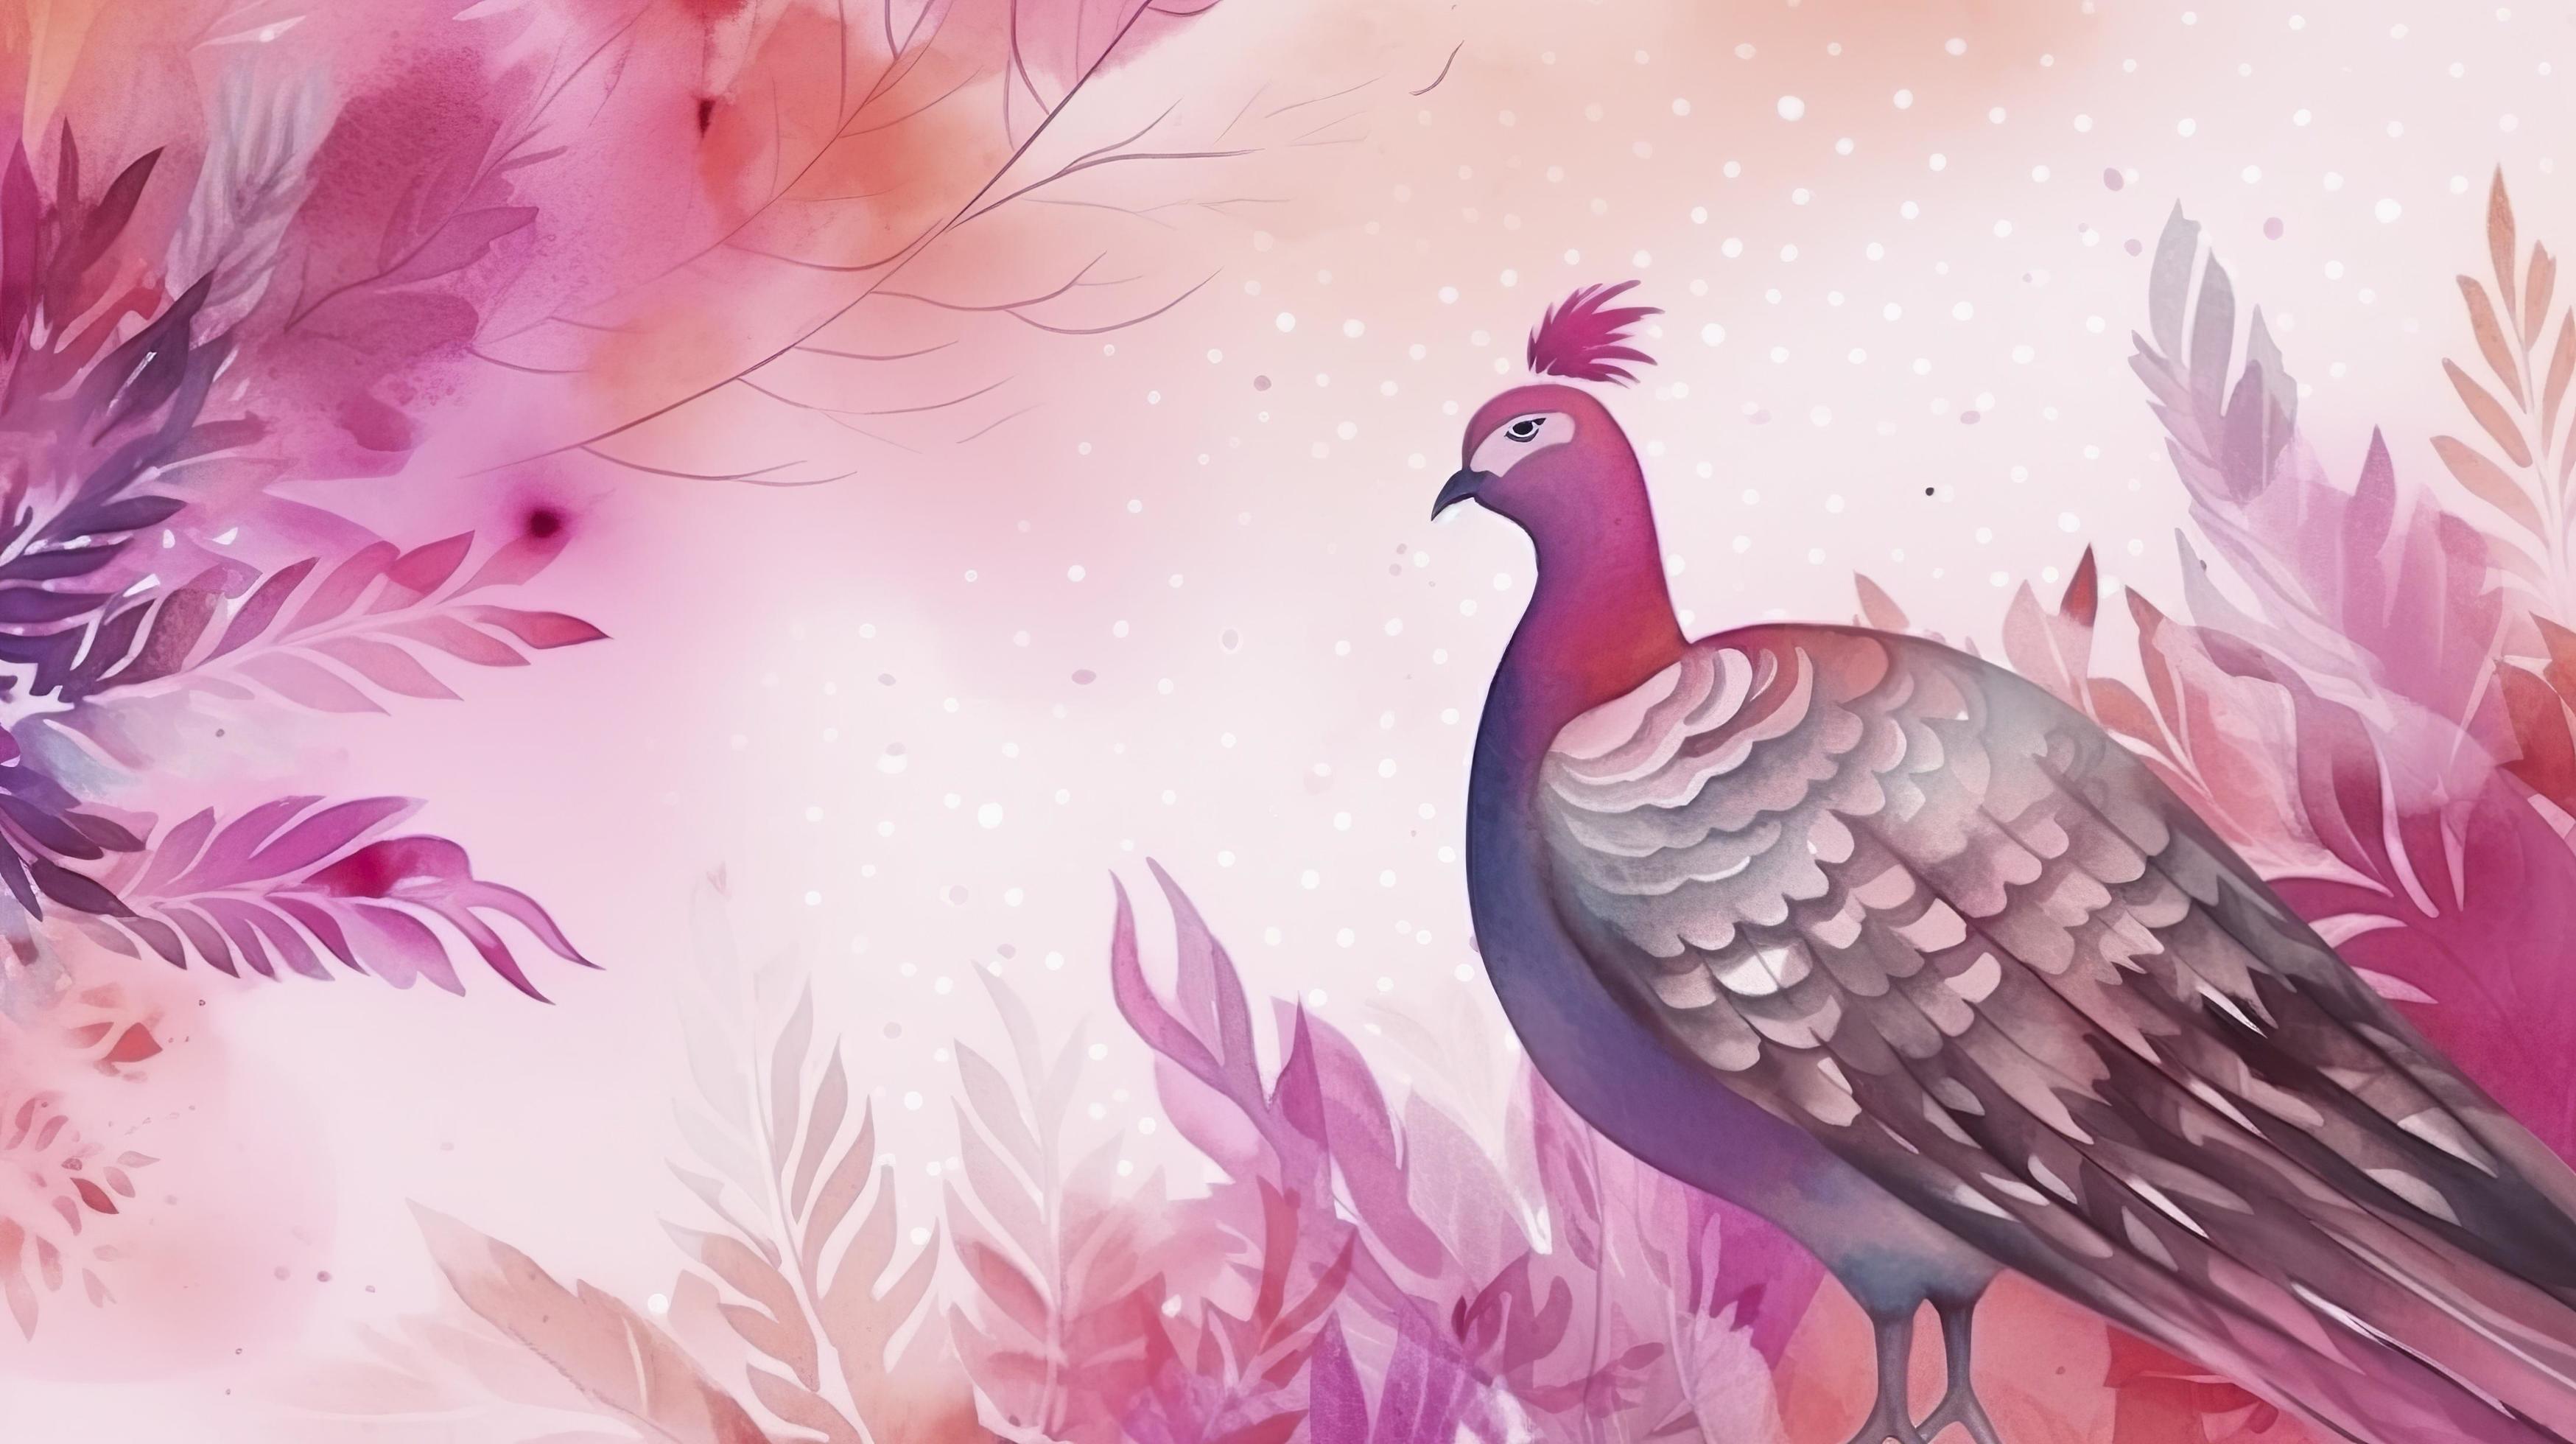 A watercolor illustration of a colorful bird in a pink and purple environment. - Pink anime, peacock